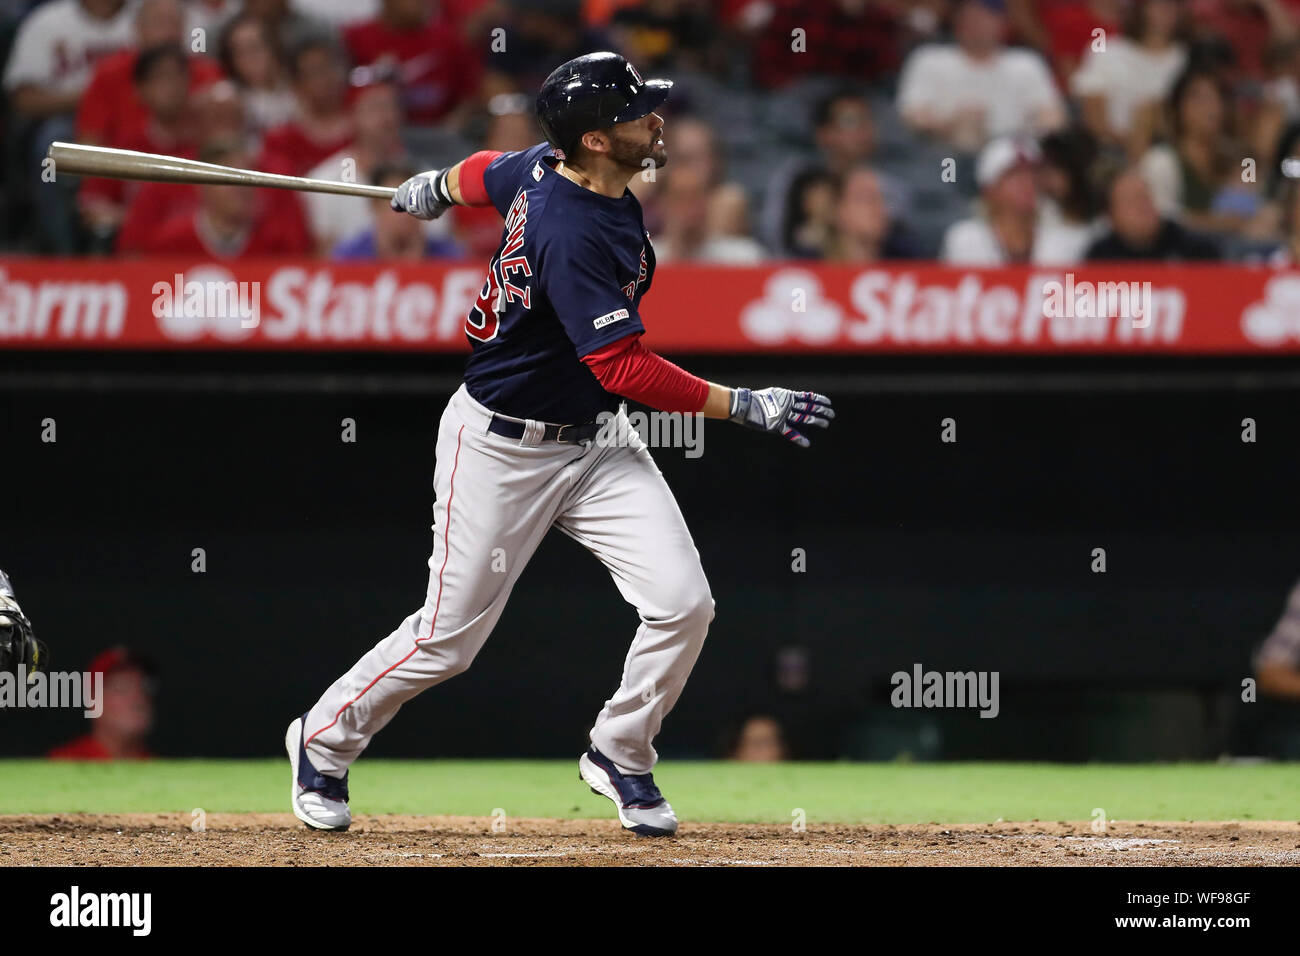 August 30, 2019: Boston Red Sox left fielder J.D. Martinez (28) homers during the game between the Boston Red Sox and the Los Angeles Angels of Anaheim at Angel Stadium in Anaheim, CA, (Photo by Peter Joneleit, Cal Sport Media) Stock Photo